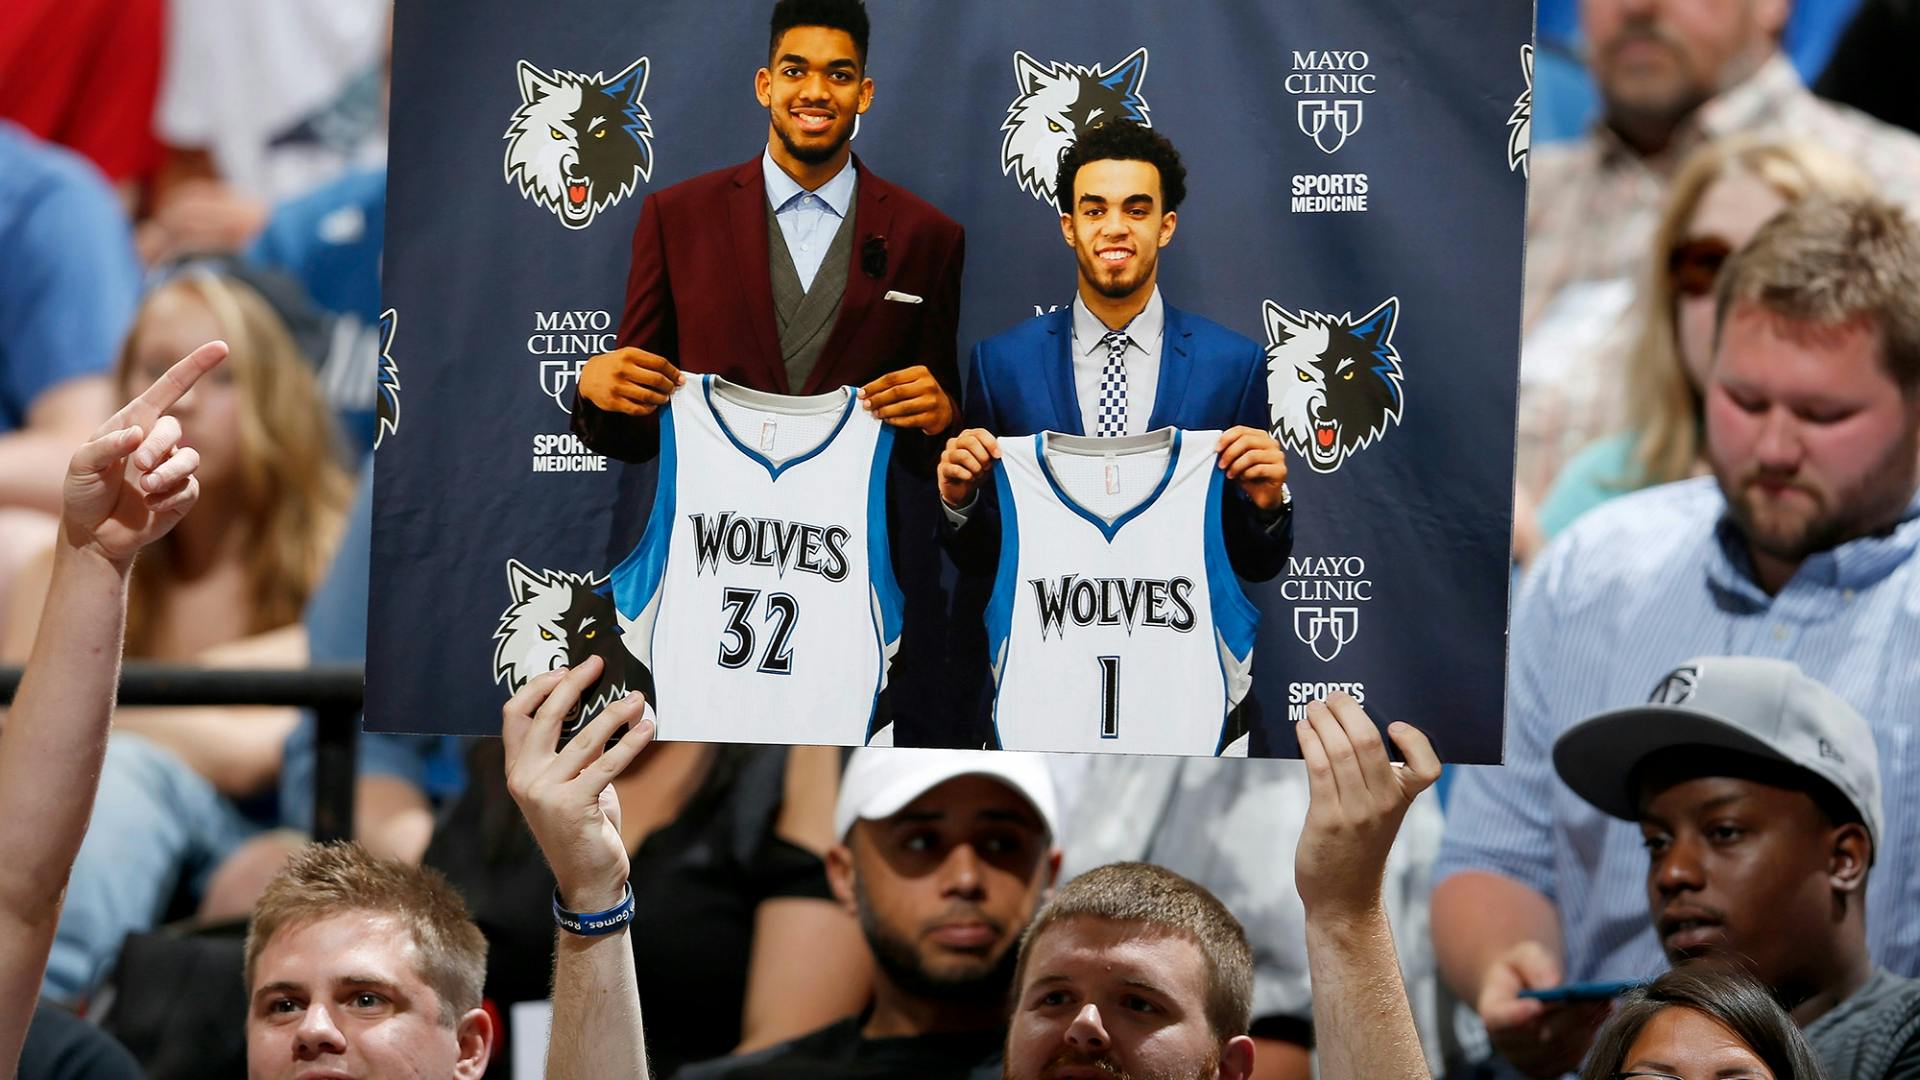 The Timberwolves held an open scrimmage at Target Center featuring rookies Tyus Jones and Karl-Anthony Towns.